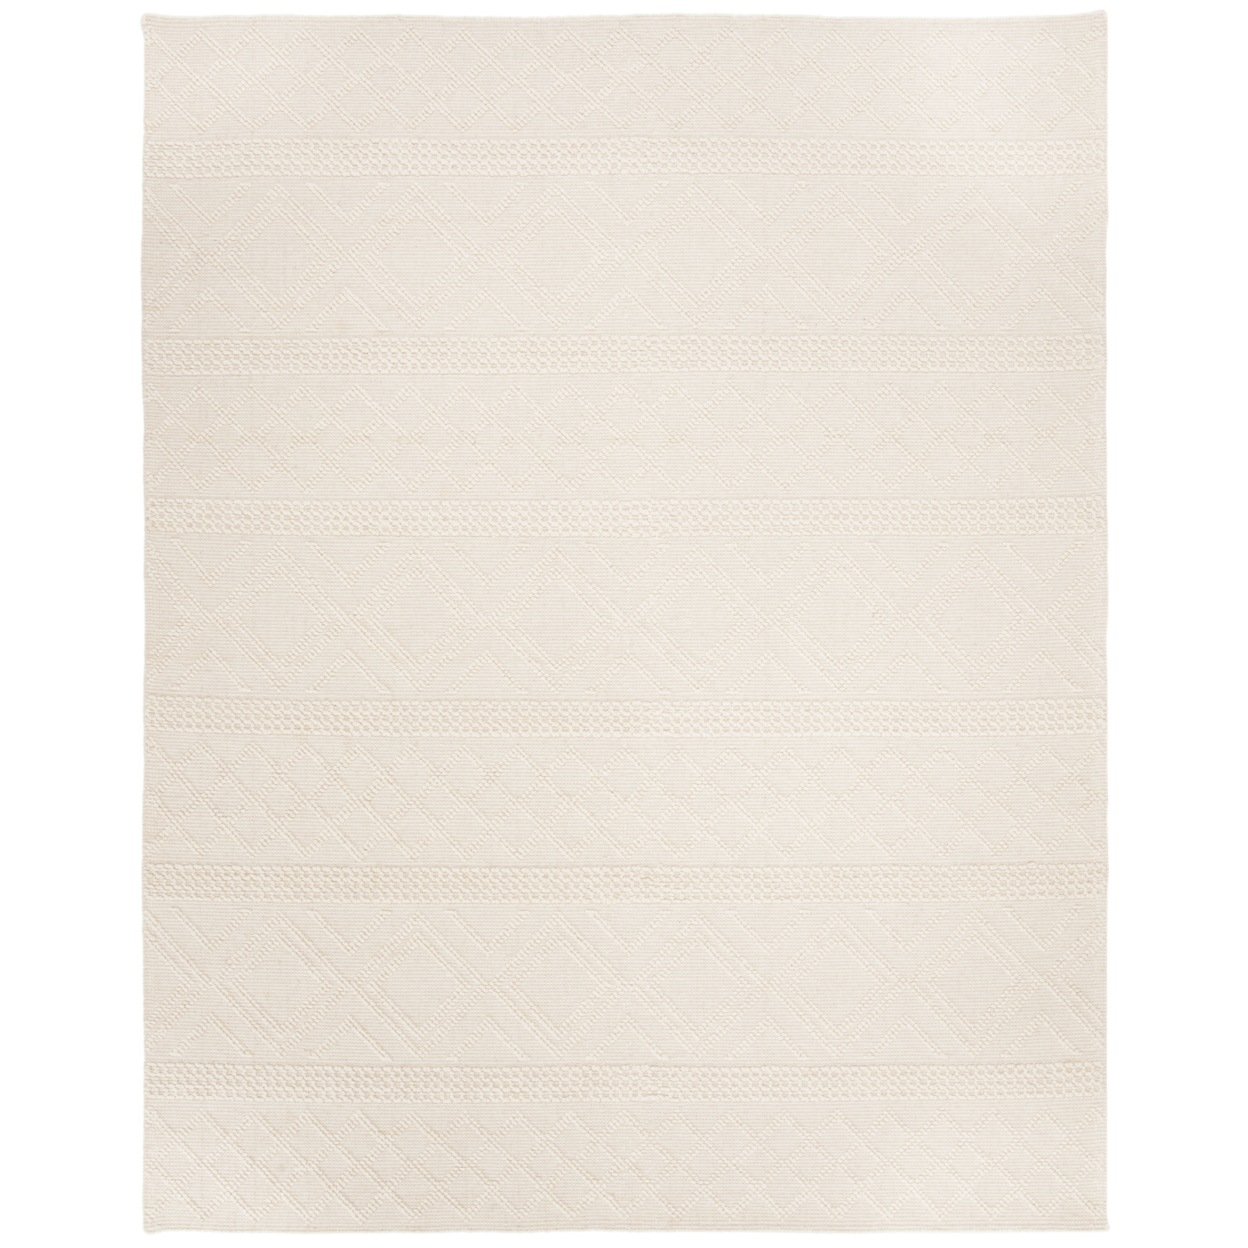 SAFAVIEH Vermont Collection VRM211A Handwoven Ivory Rug - 8 X 10